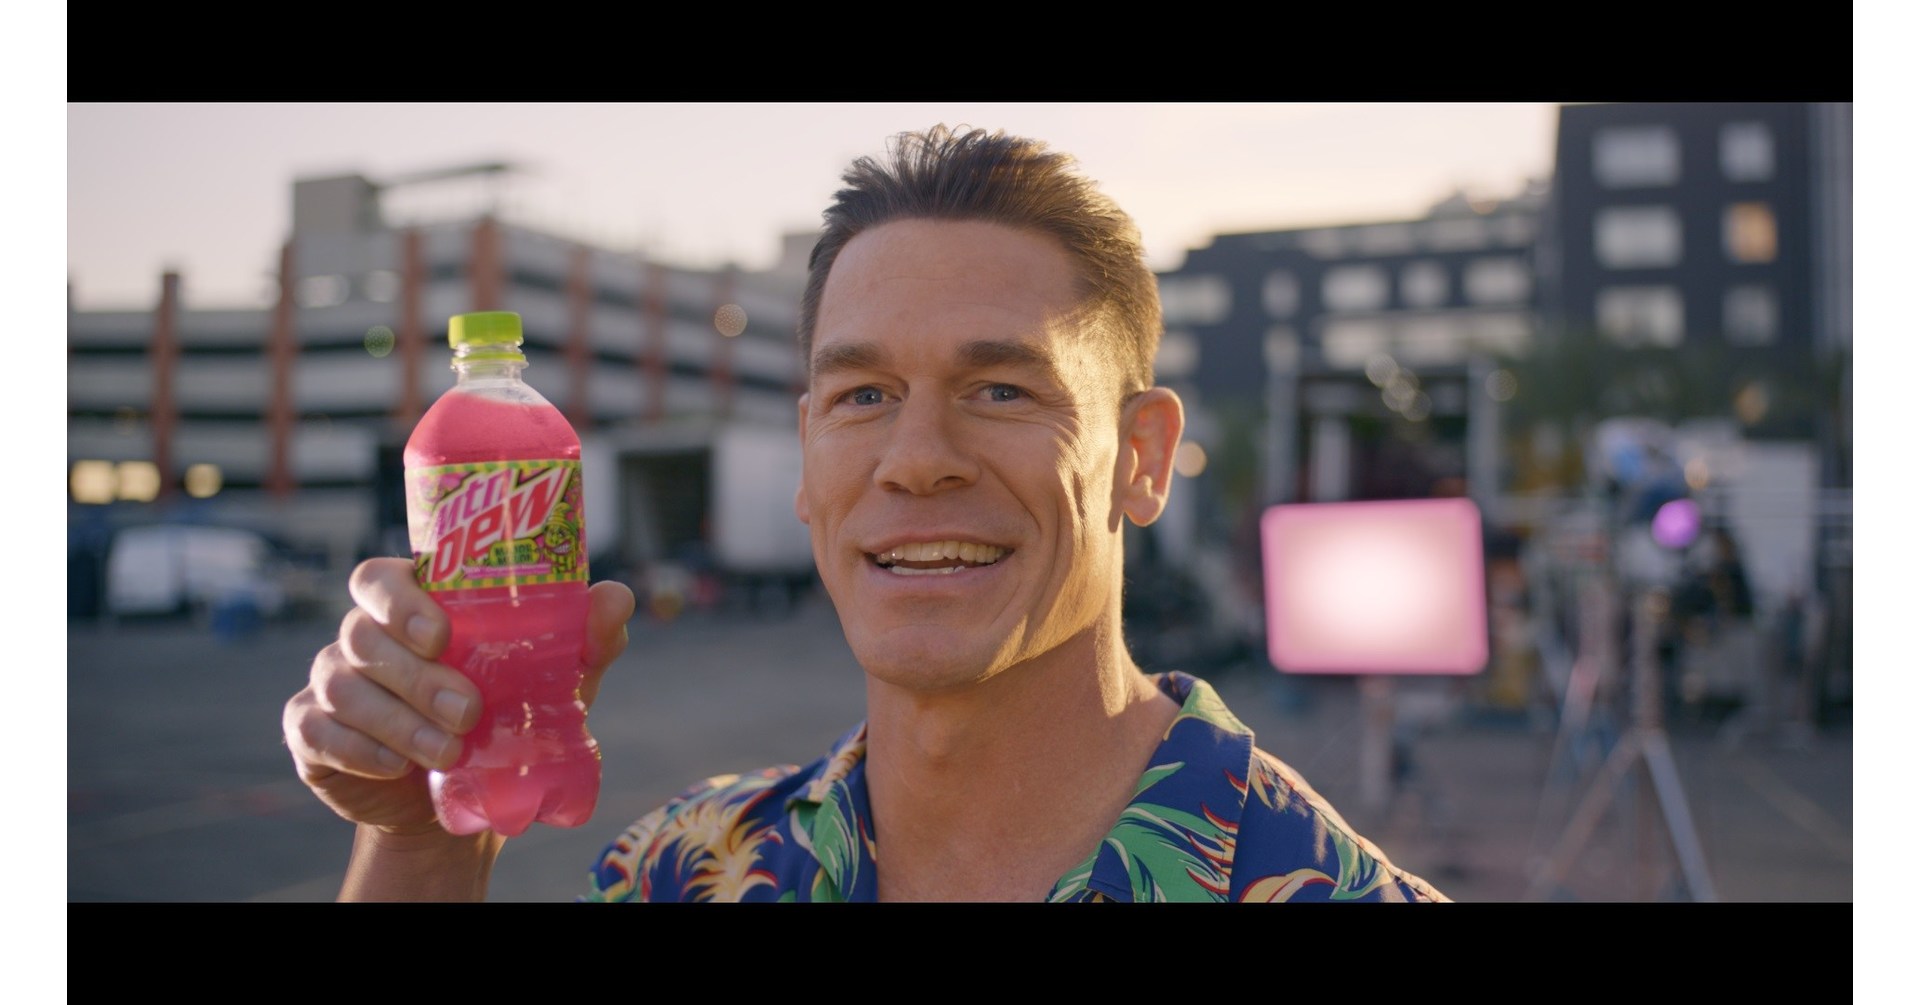 Mtn Dew Transports Fans To The World Of Mtn Dew Major Melon With First Of Its Kind Super Bowl Ad